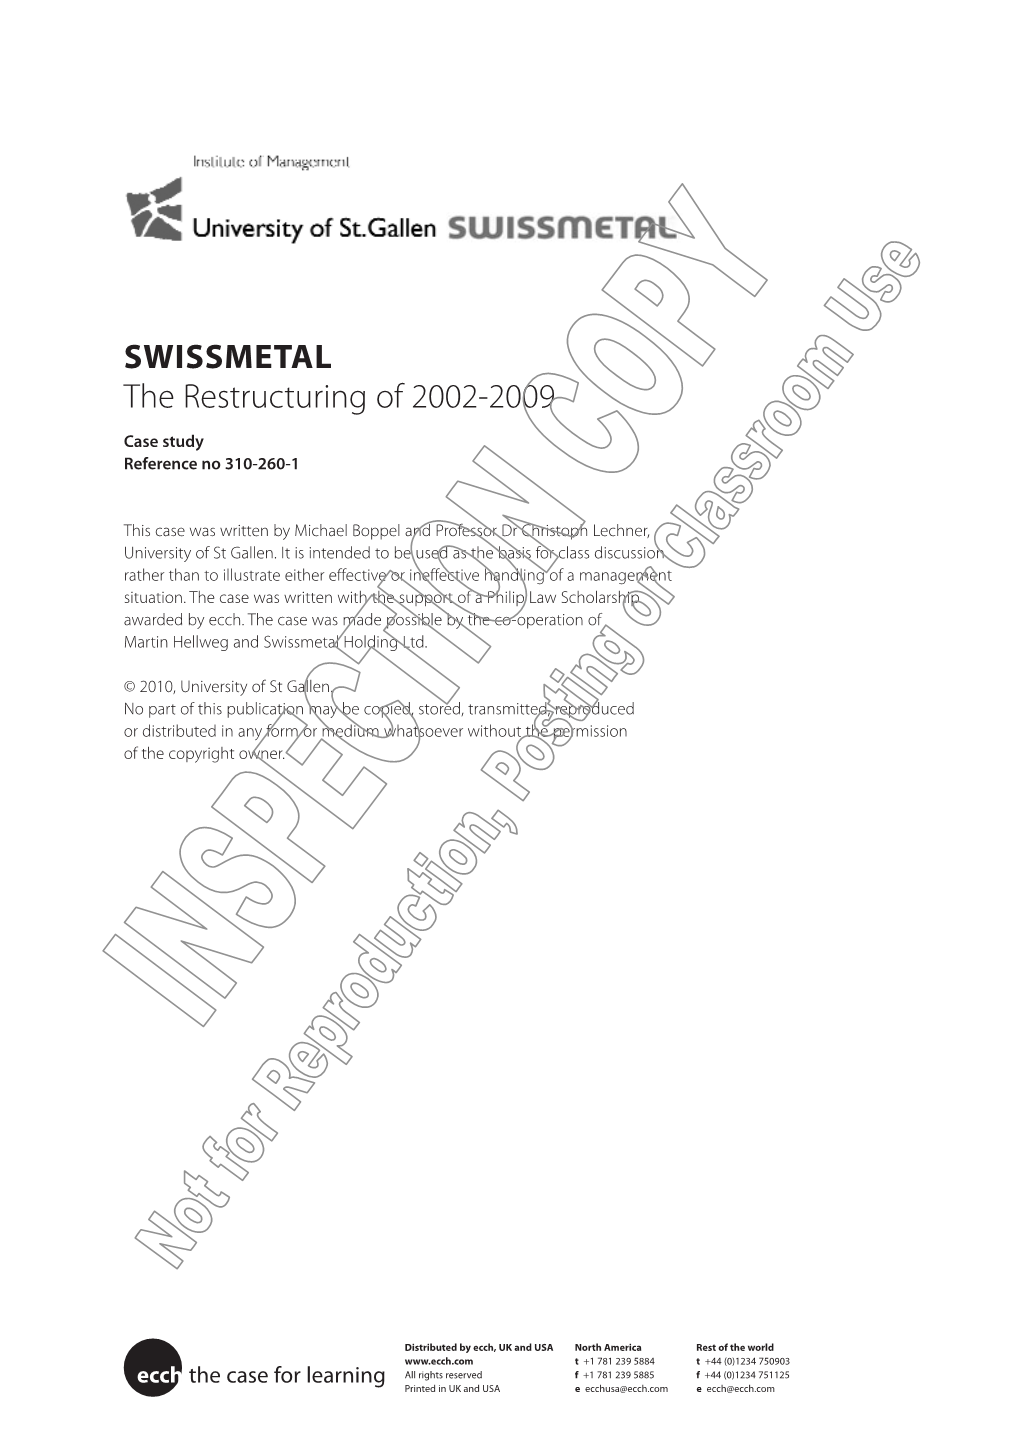 SWISSMETAL the Restructuring of 2002-2009 Case Study Reference No 310-260-1